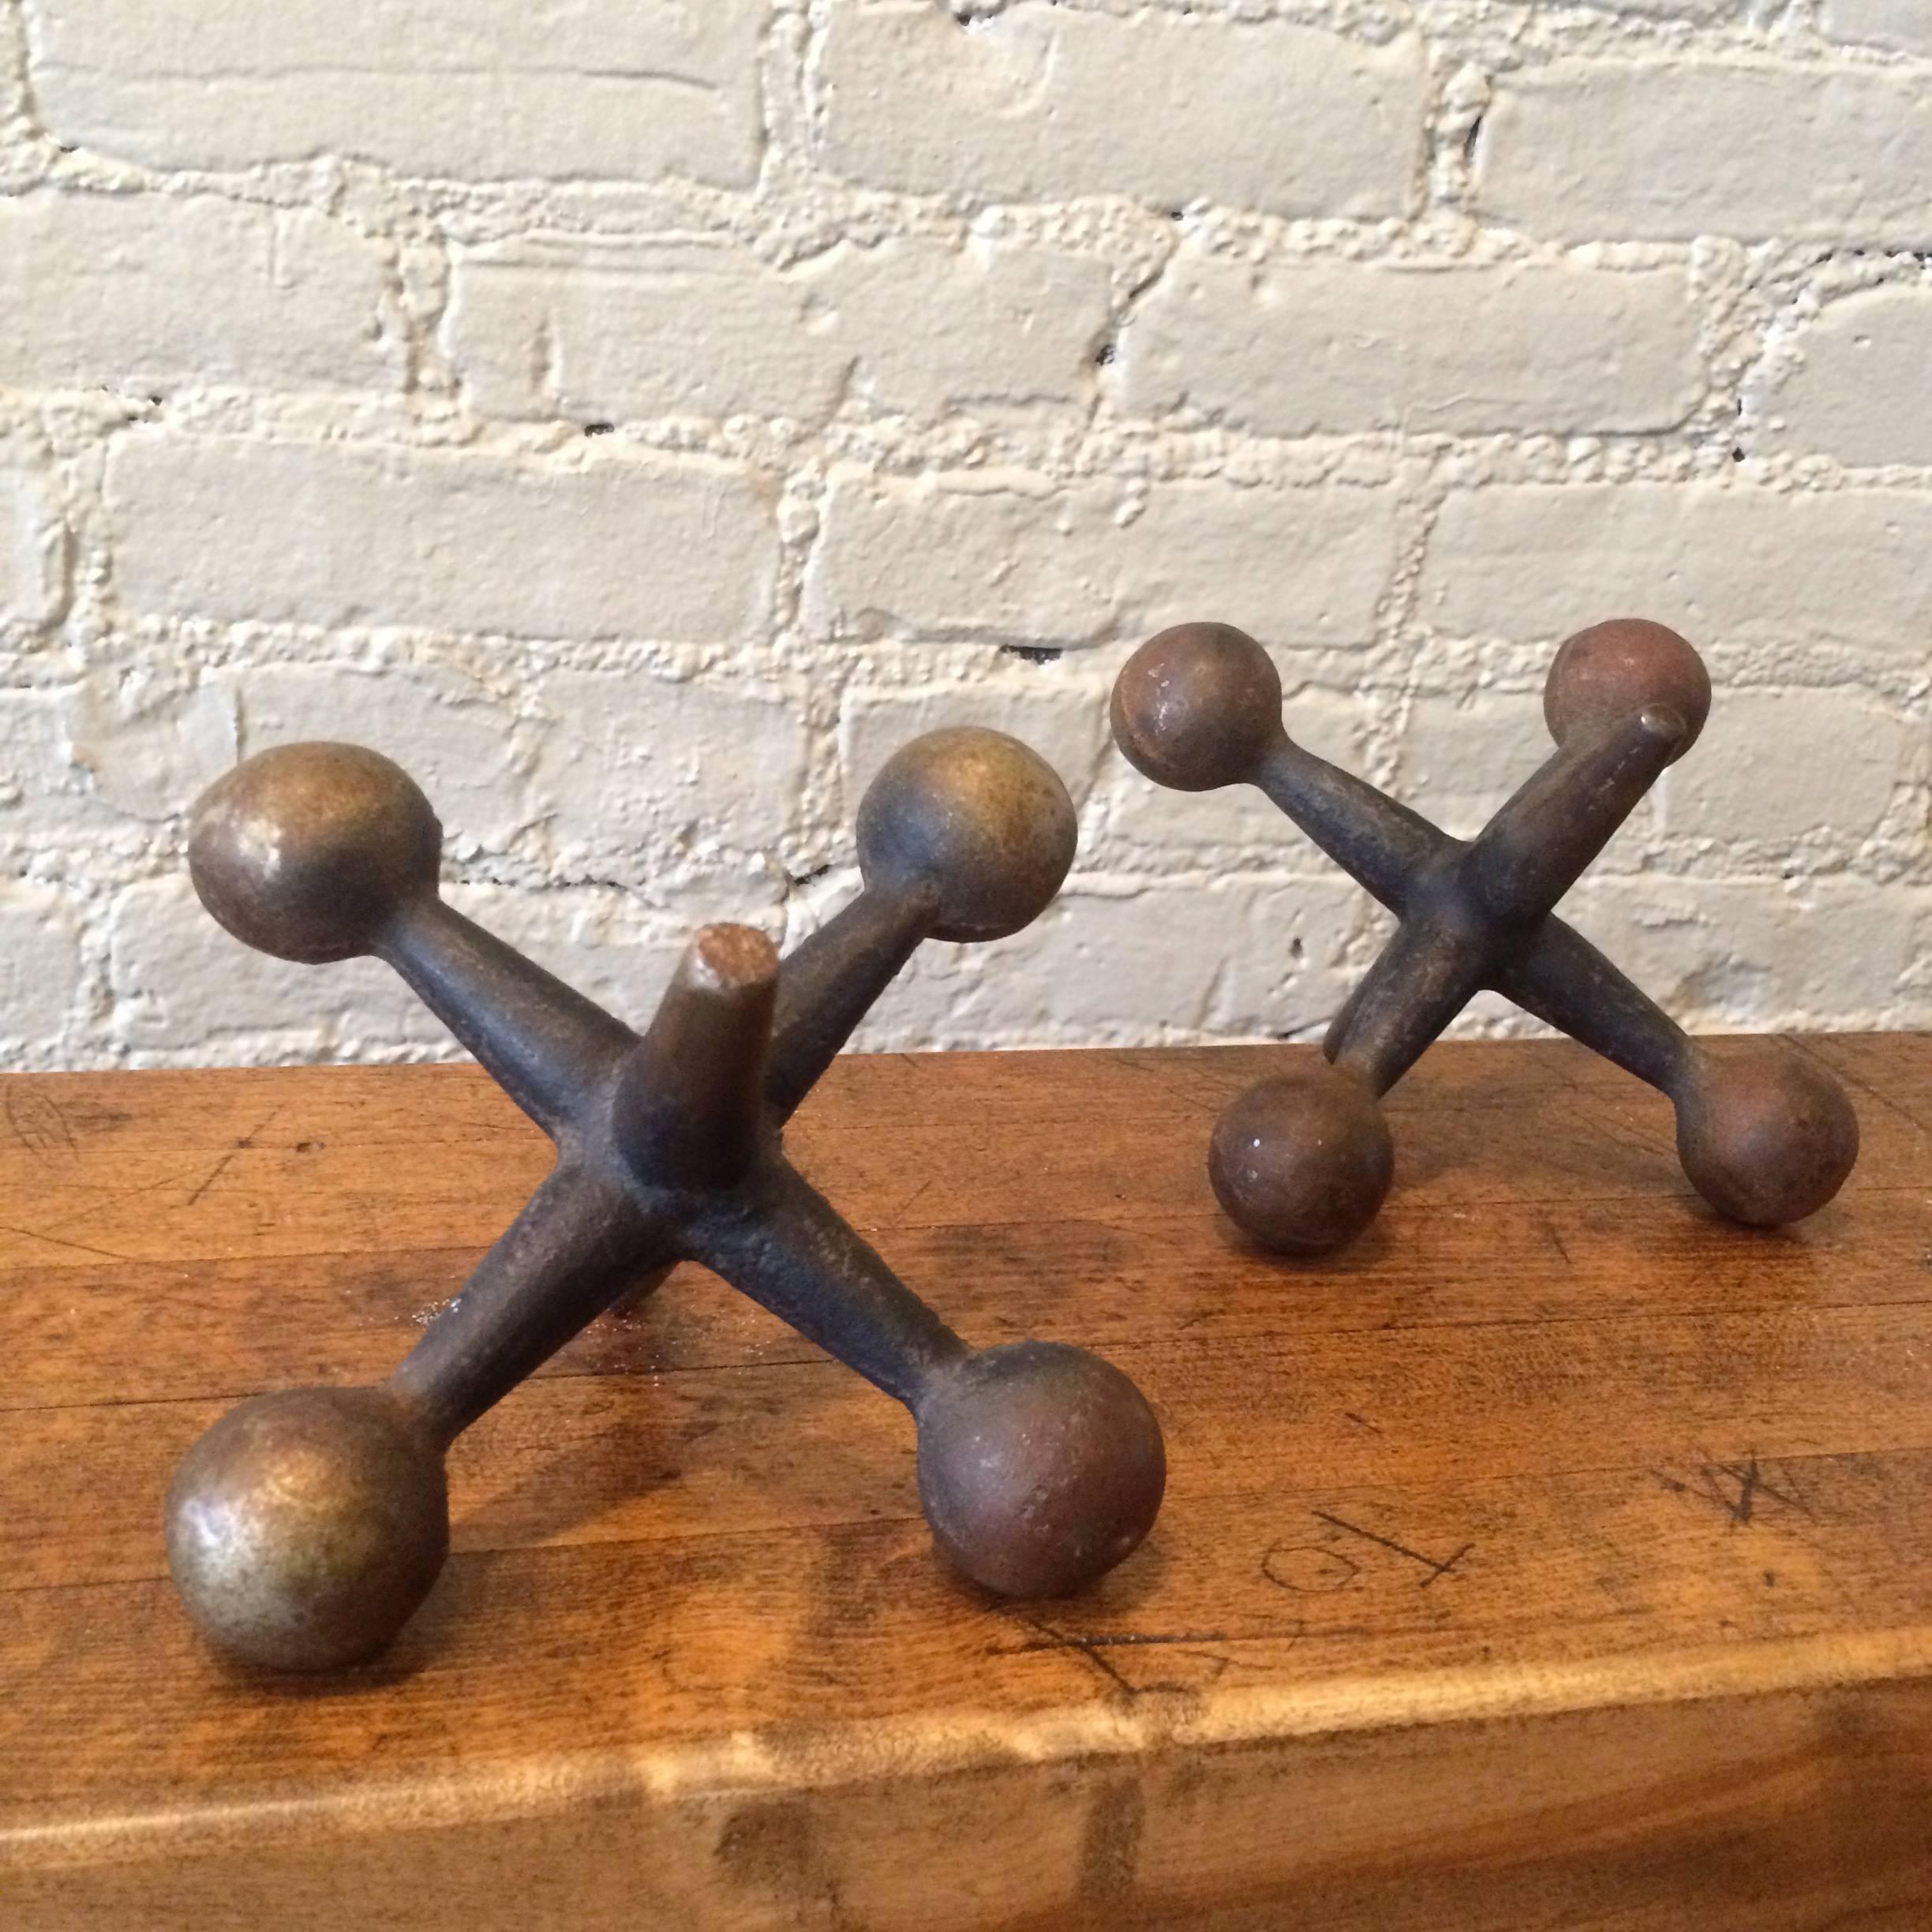 Finely patinated pair of oversized, cast iron jacks work can be used as bookends, doorstops or decorative objects.